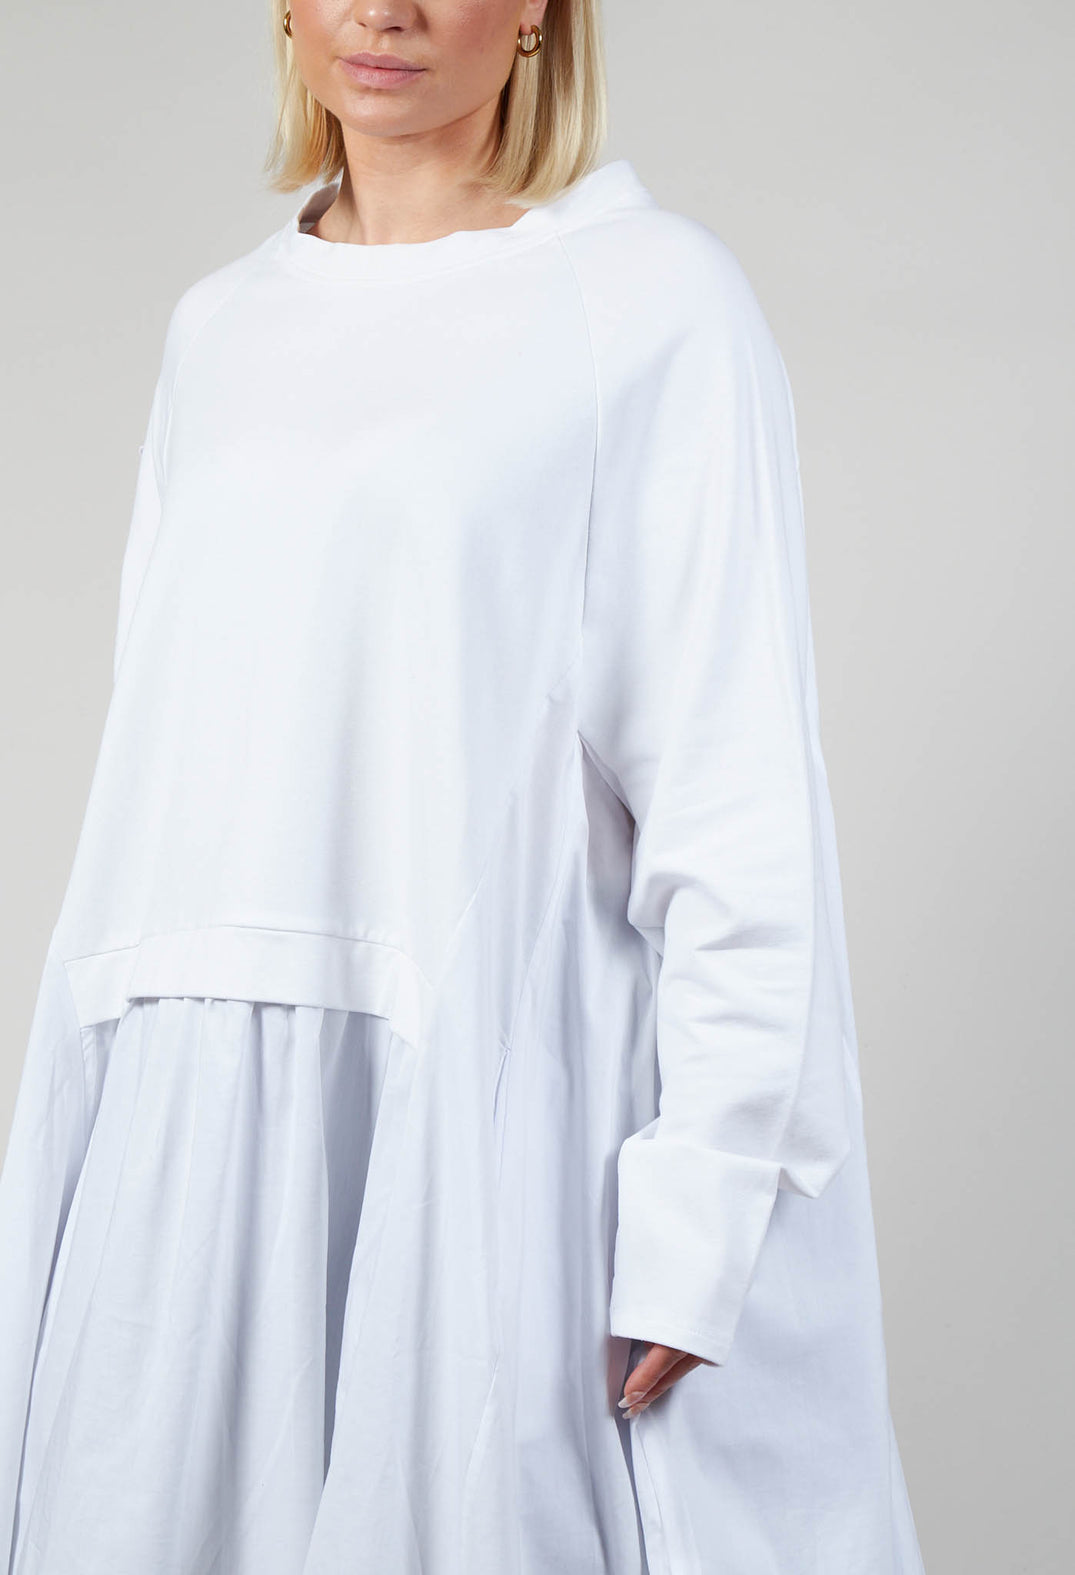 Pullover Style Jersey Tunic in White